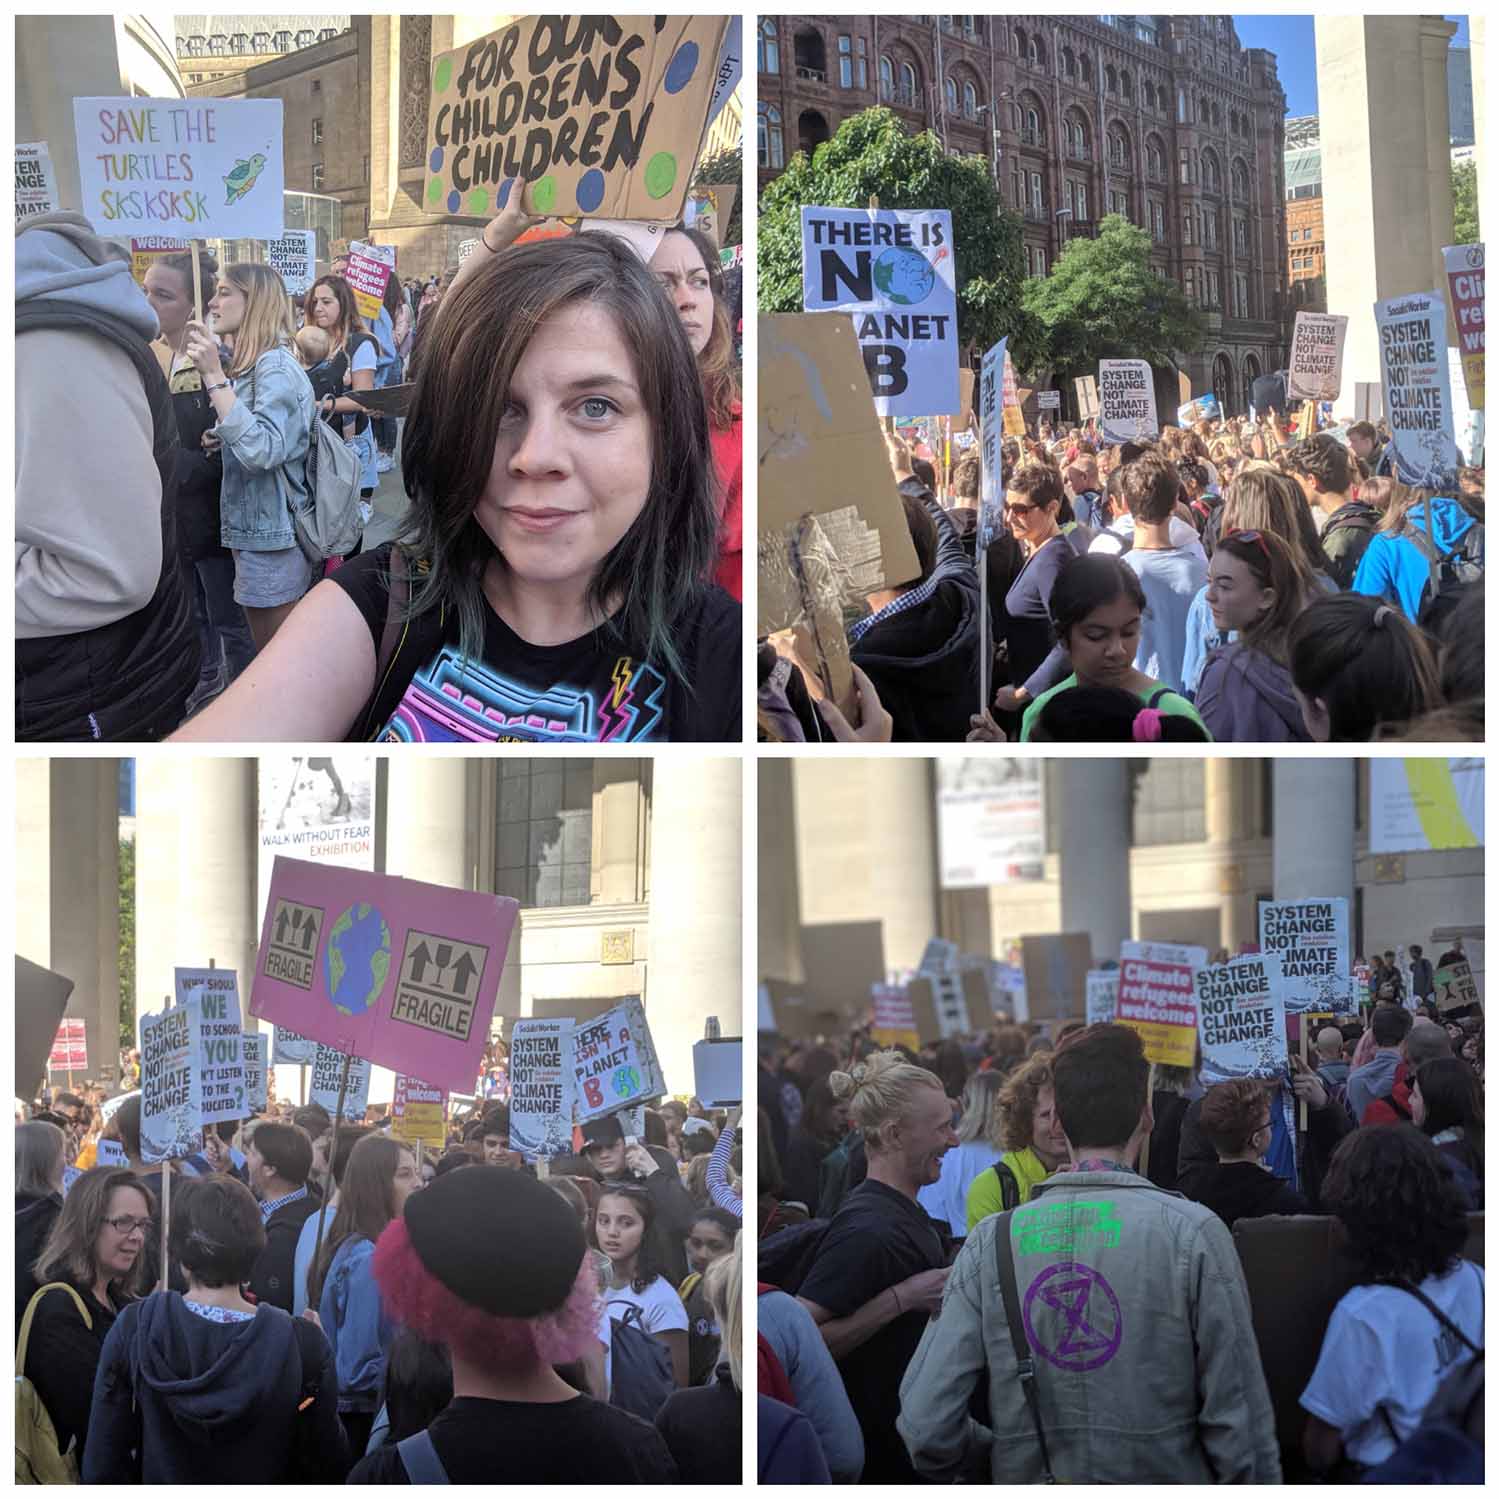 A collage of photos of people at a protest holding signs